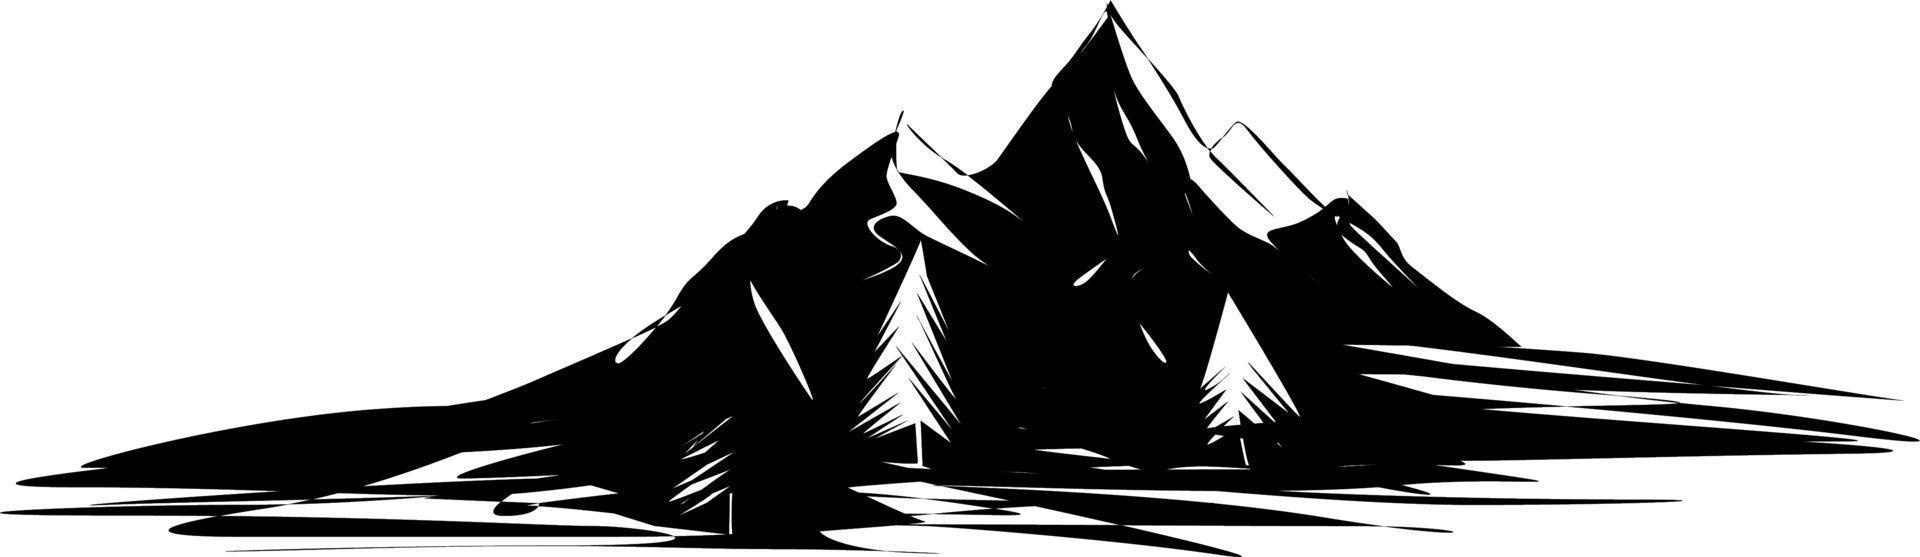 The illustrations and clipart. silhouette of a mountain vector